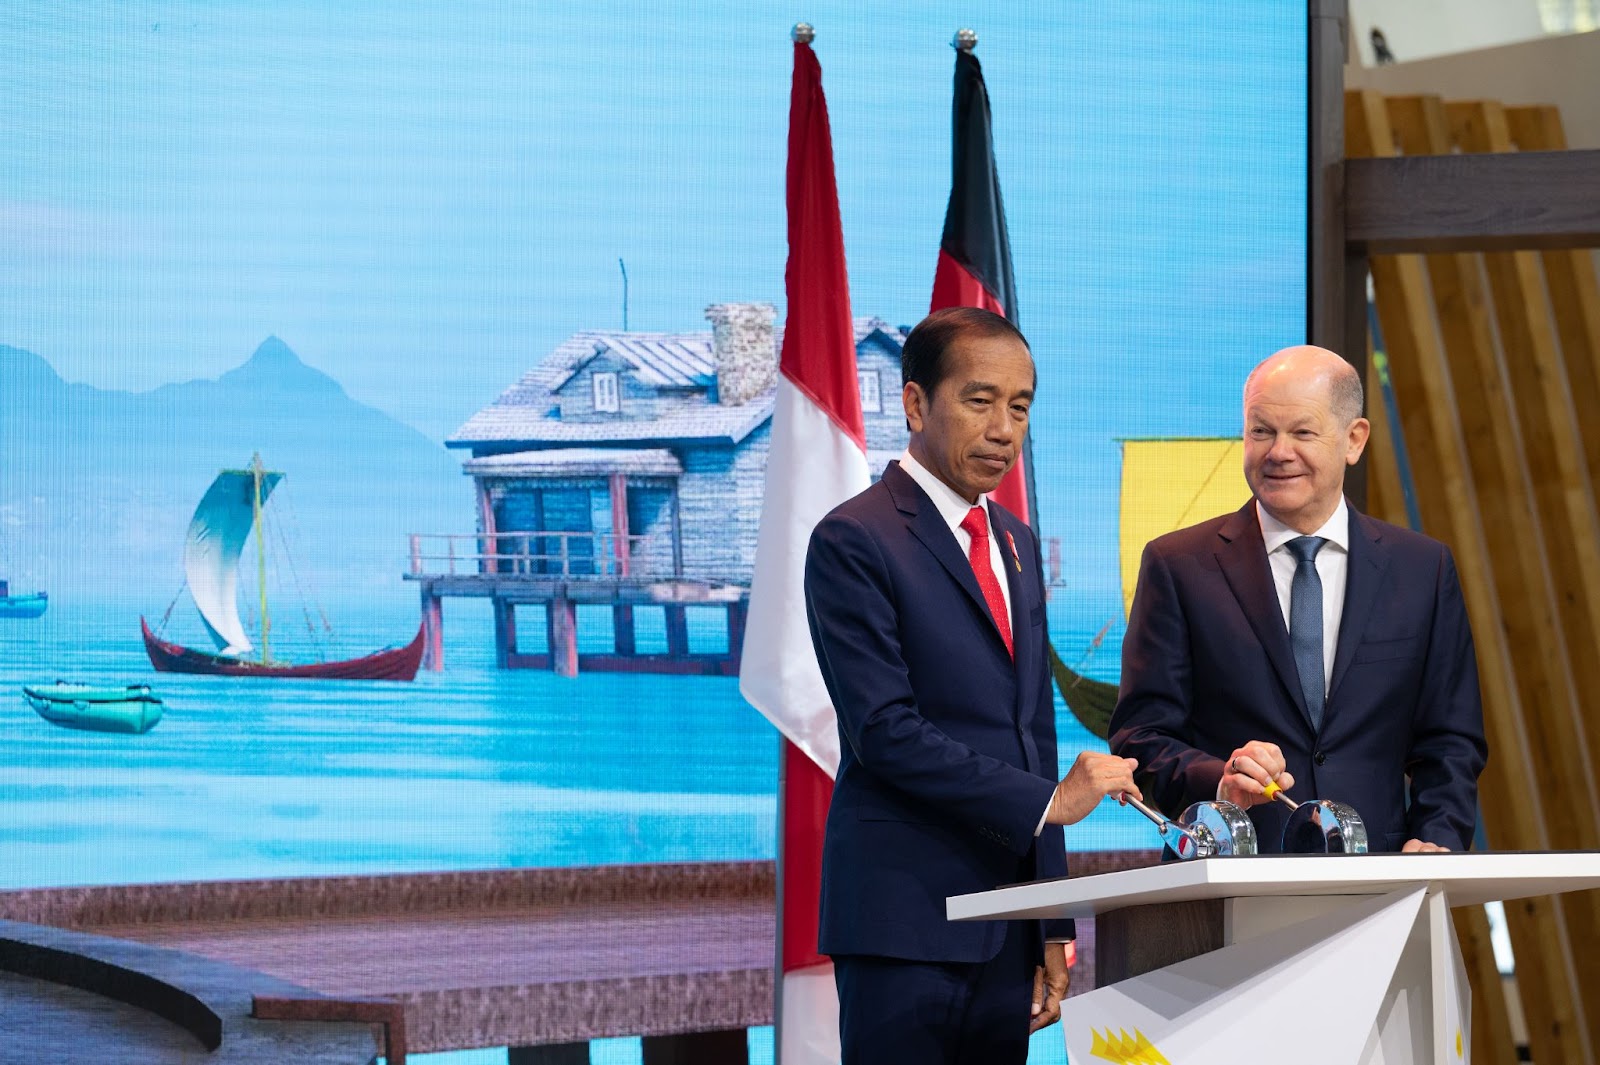 The Pinisi Ship-themed Indonesian Pavilion at Hannover Messe 2023 Inaugurated by the President of the Republic of Indonesia and the Chancellor of Germany